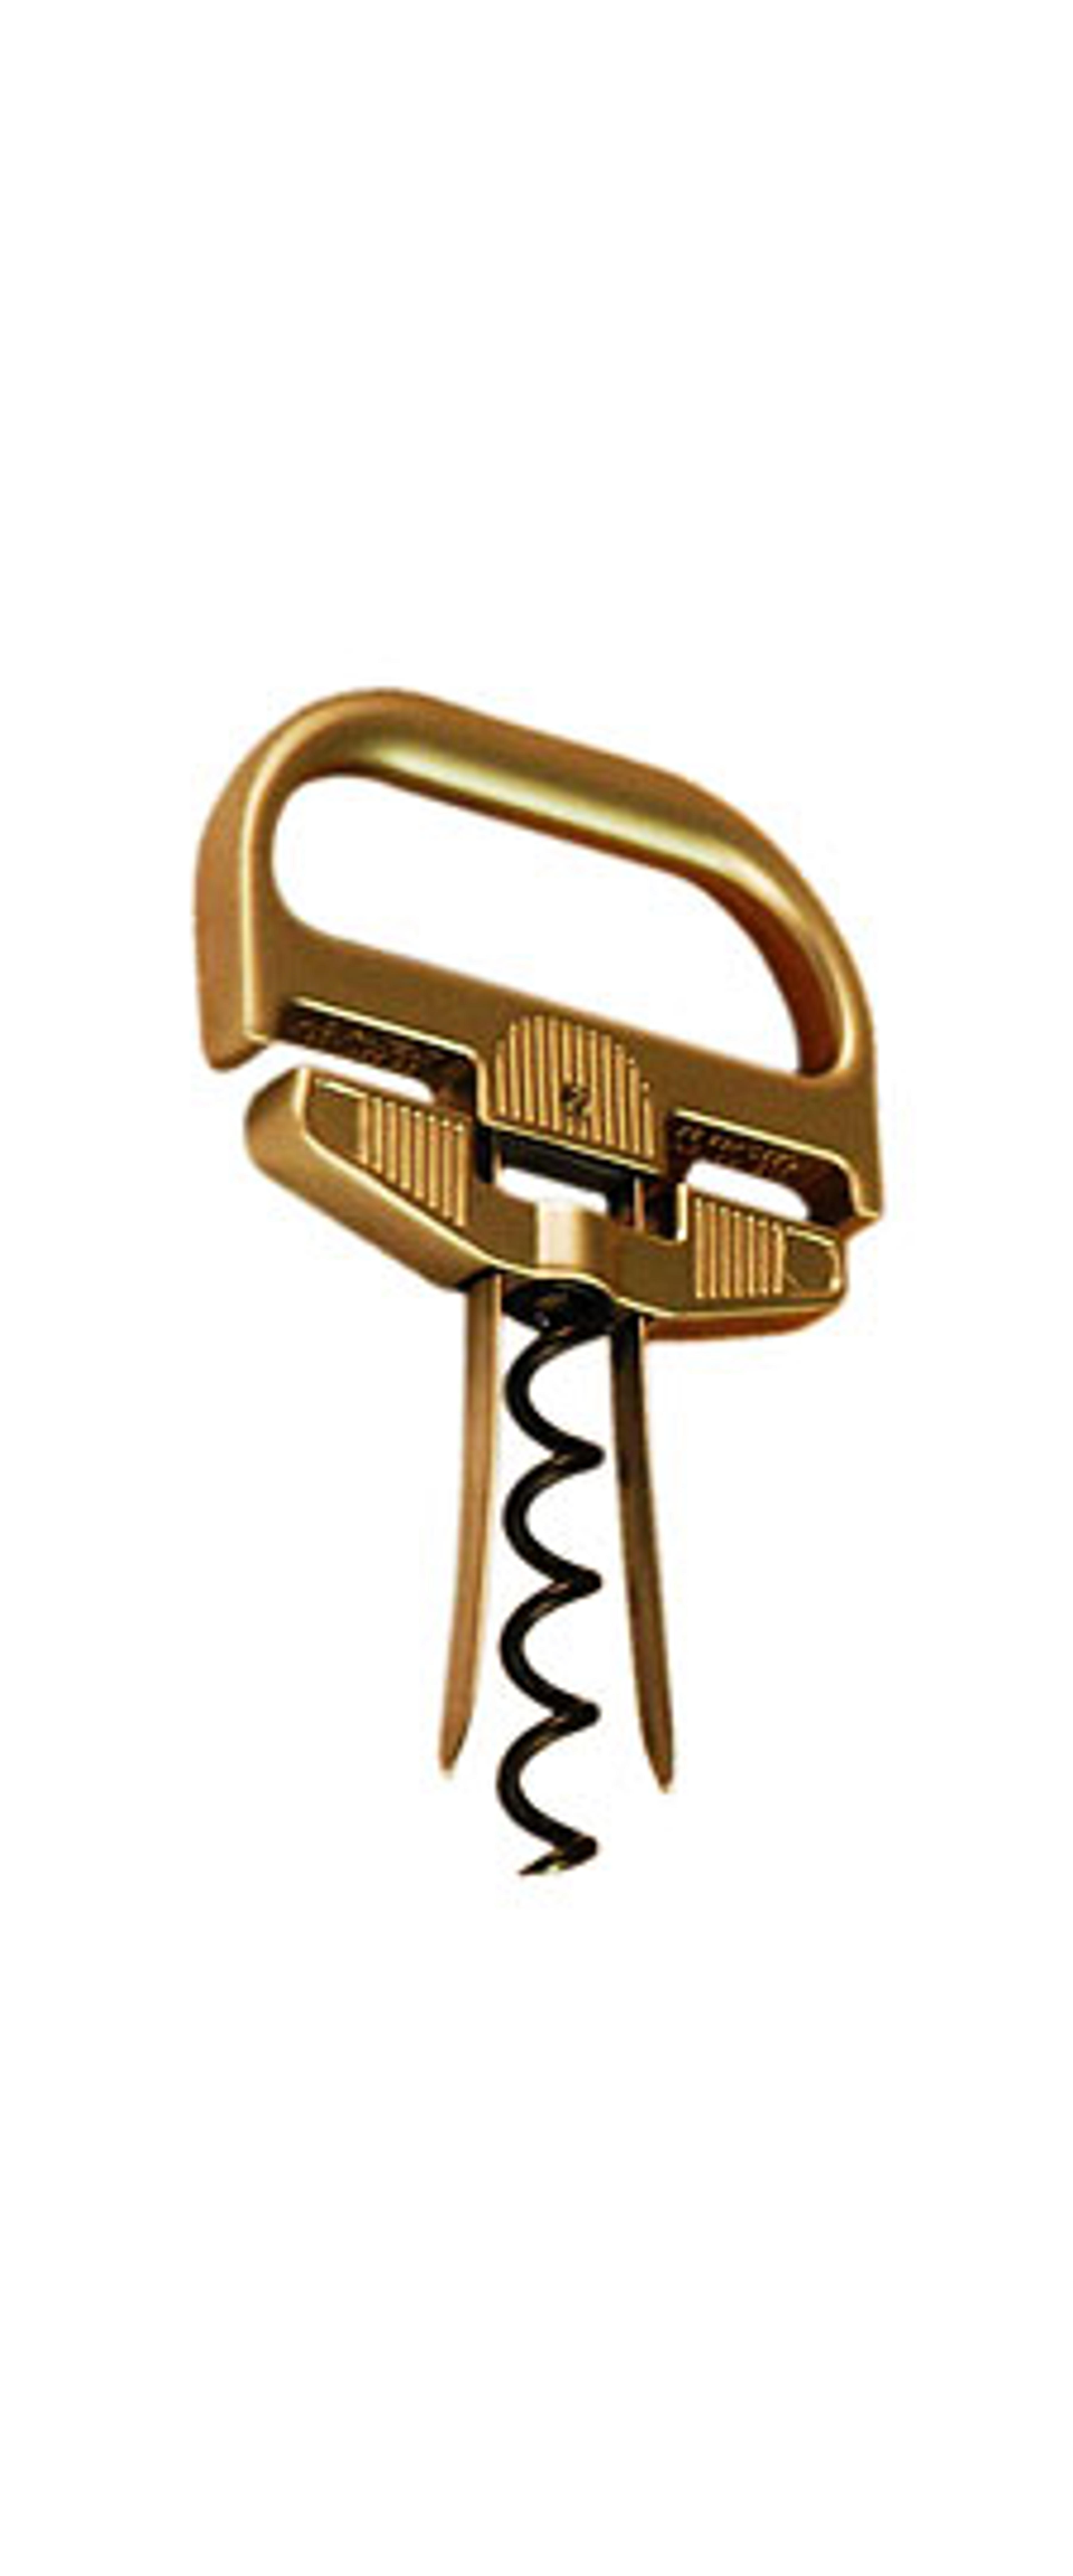 The Durand Corkscrew for Removal of Old Corks with Confidence - SKU 1059030